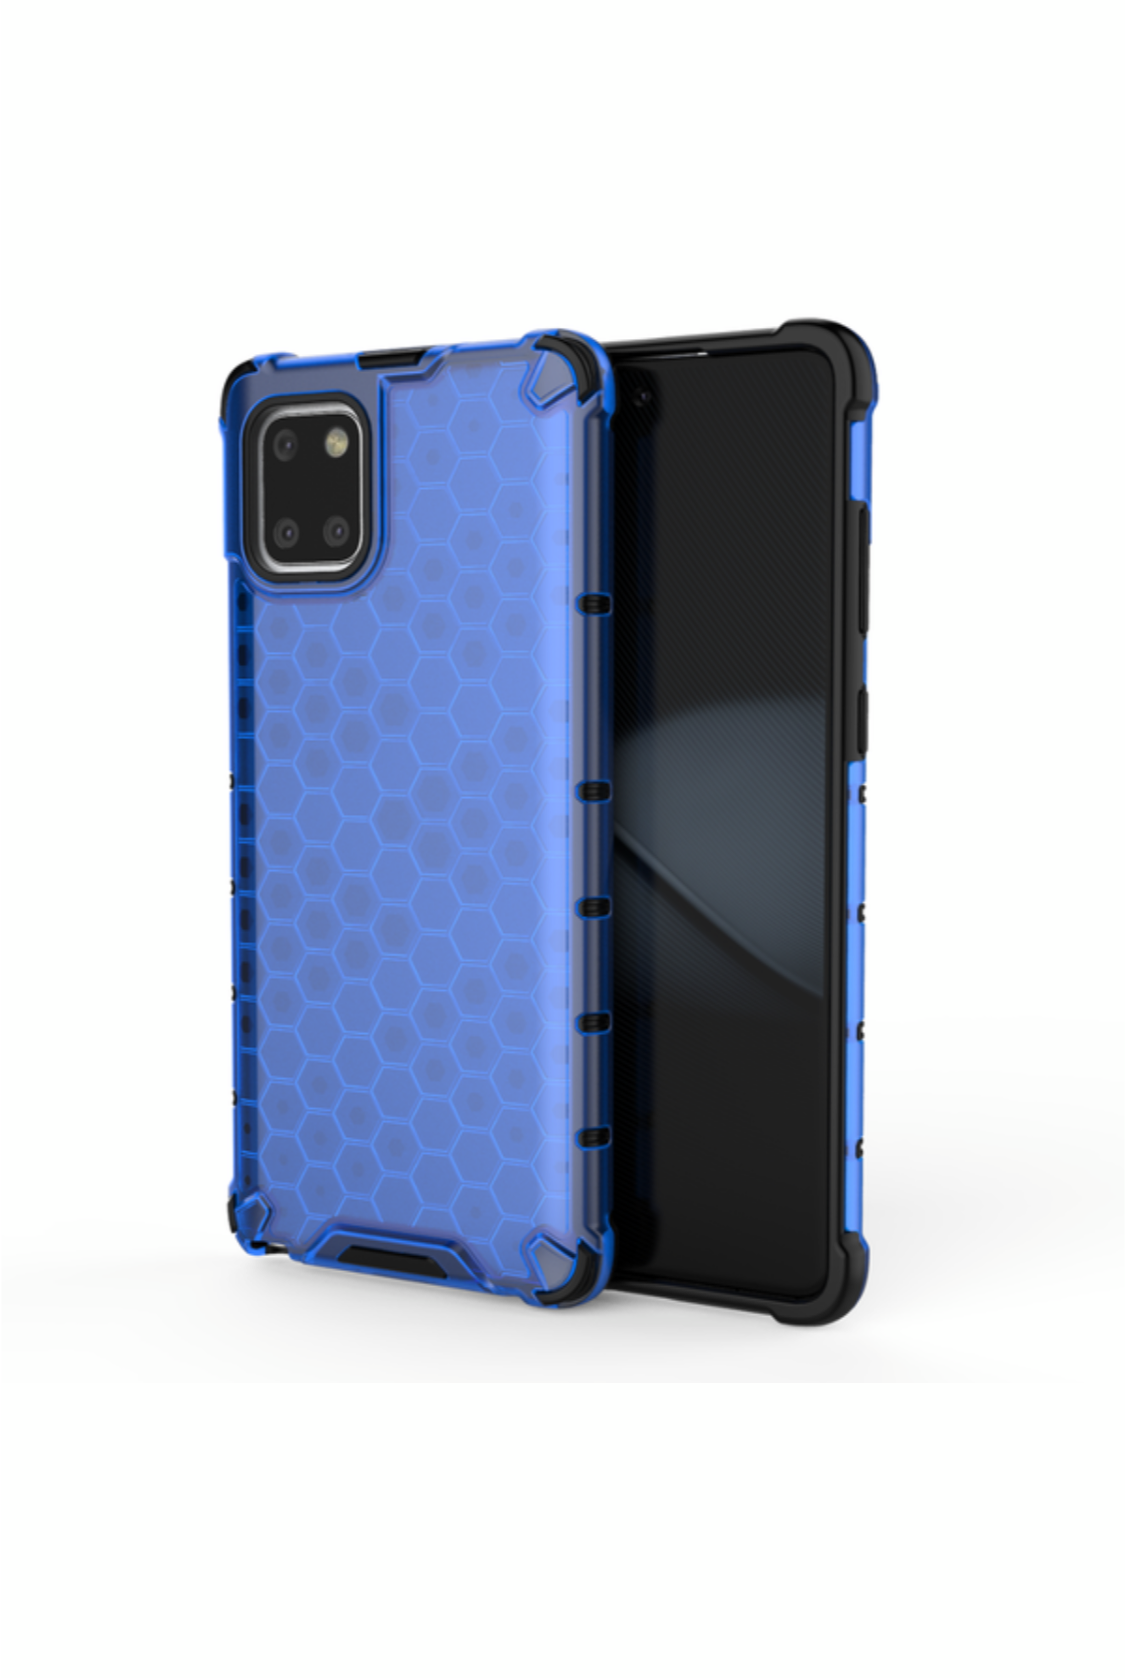 Samsung Galaxy Note 10 Lite Shockproof Honeycomb Cover